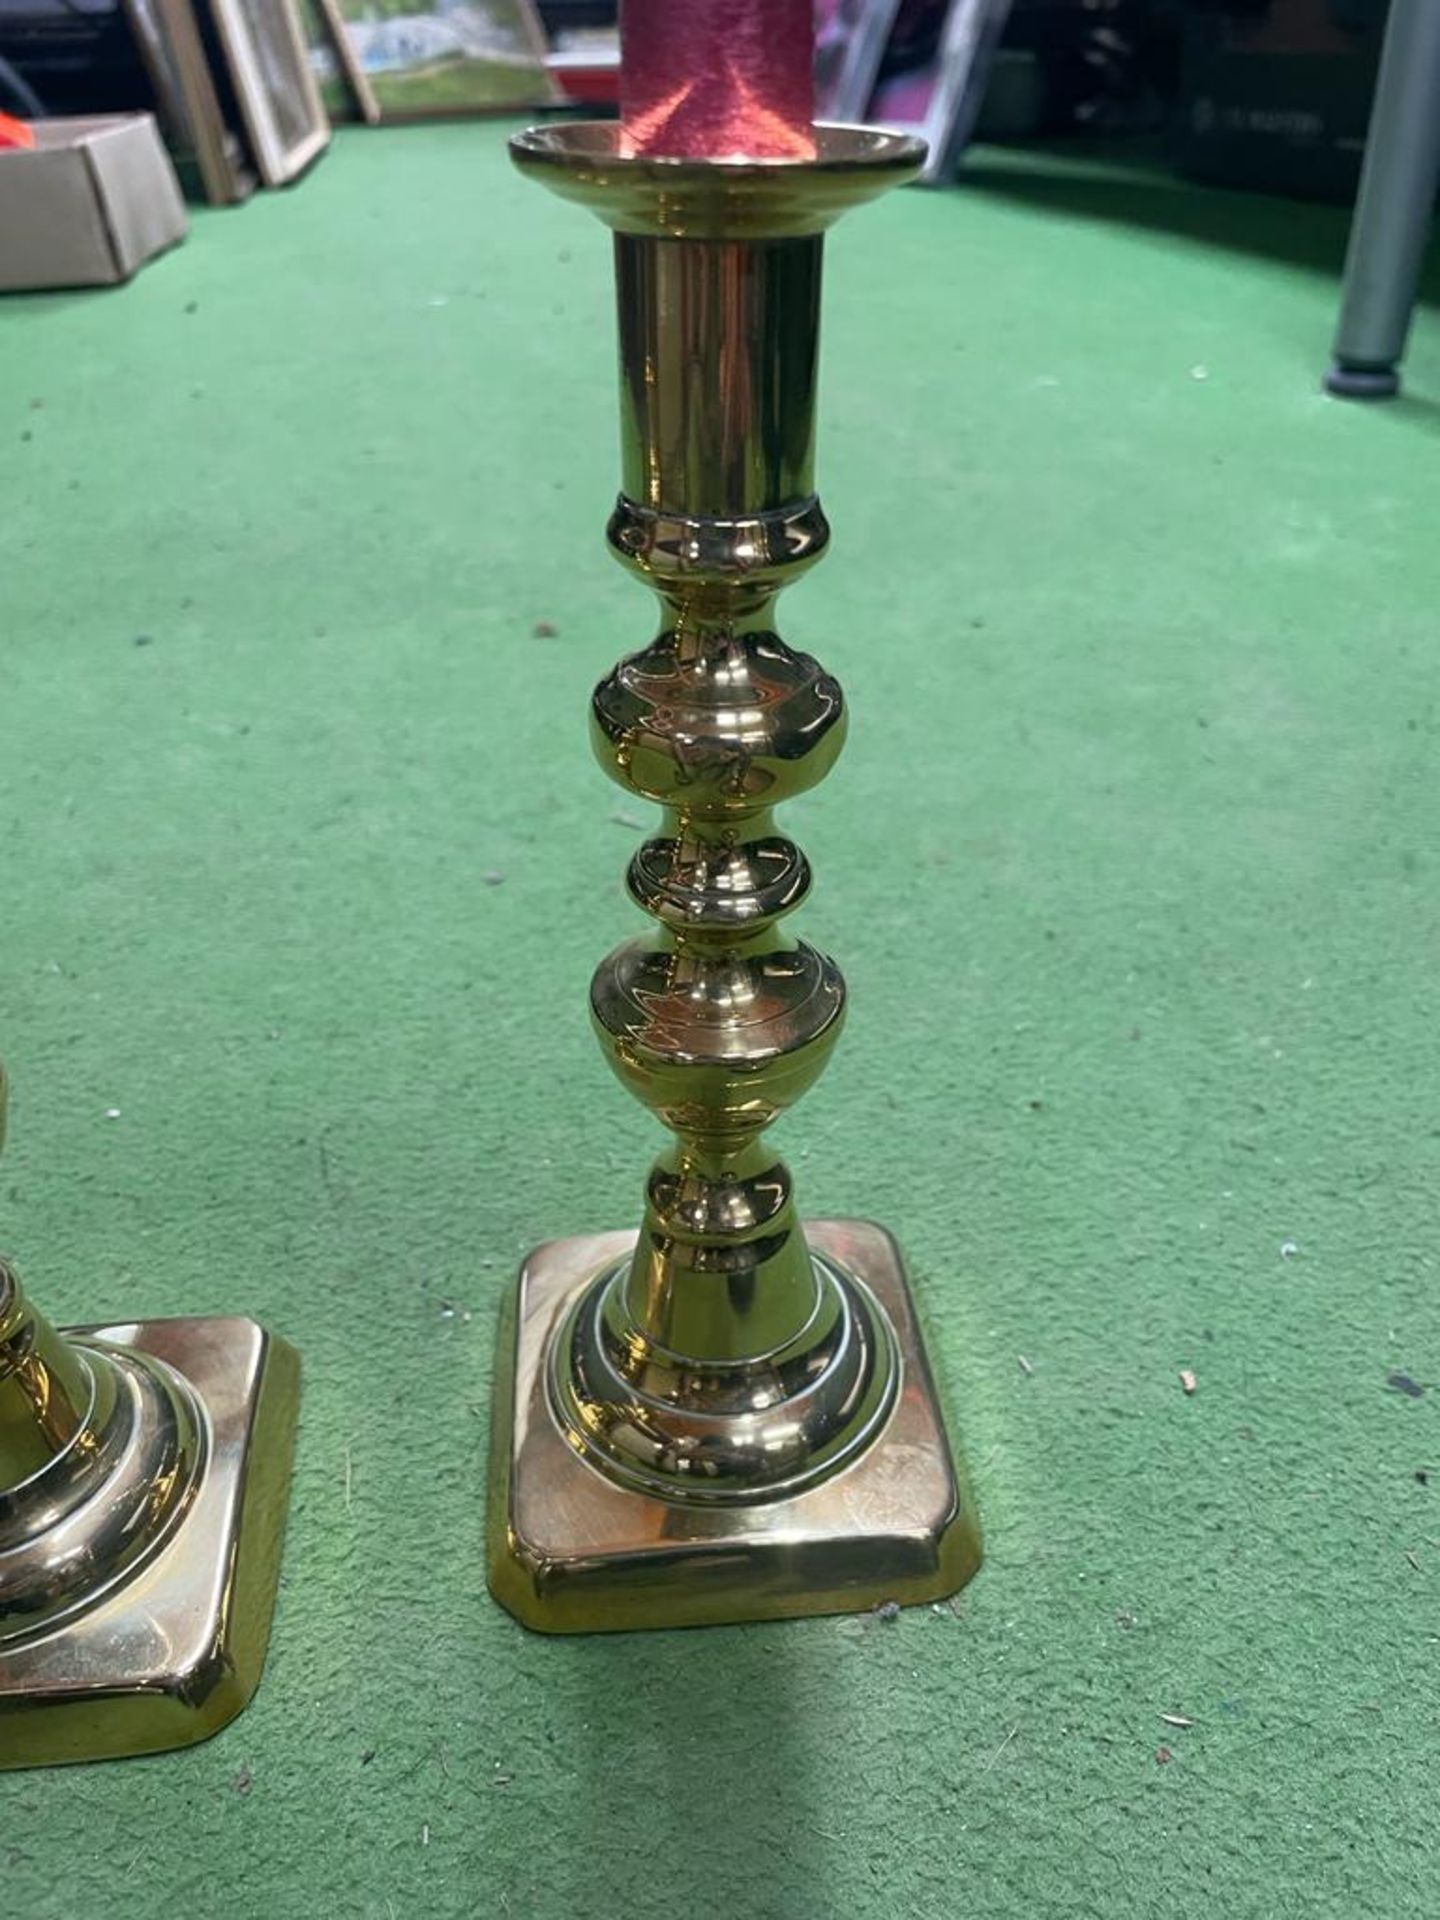 TWO PAIRS OF VINTAGE BRASS CANDLESTICKS WITH CANDLES - Image 4 of 5